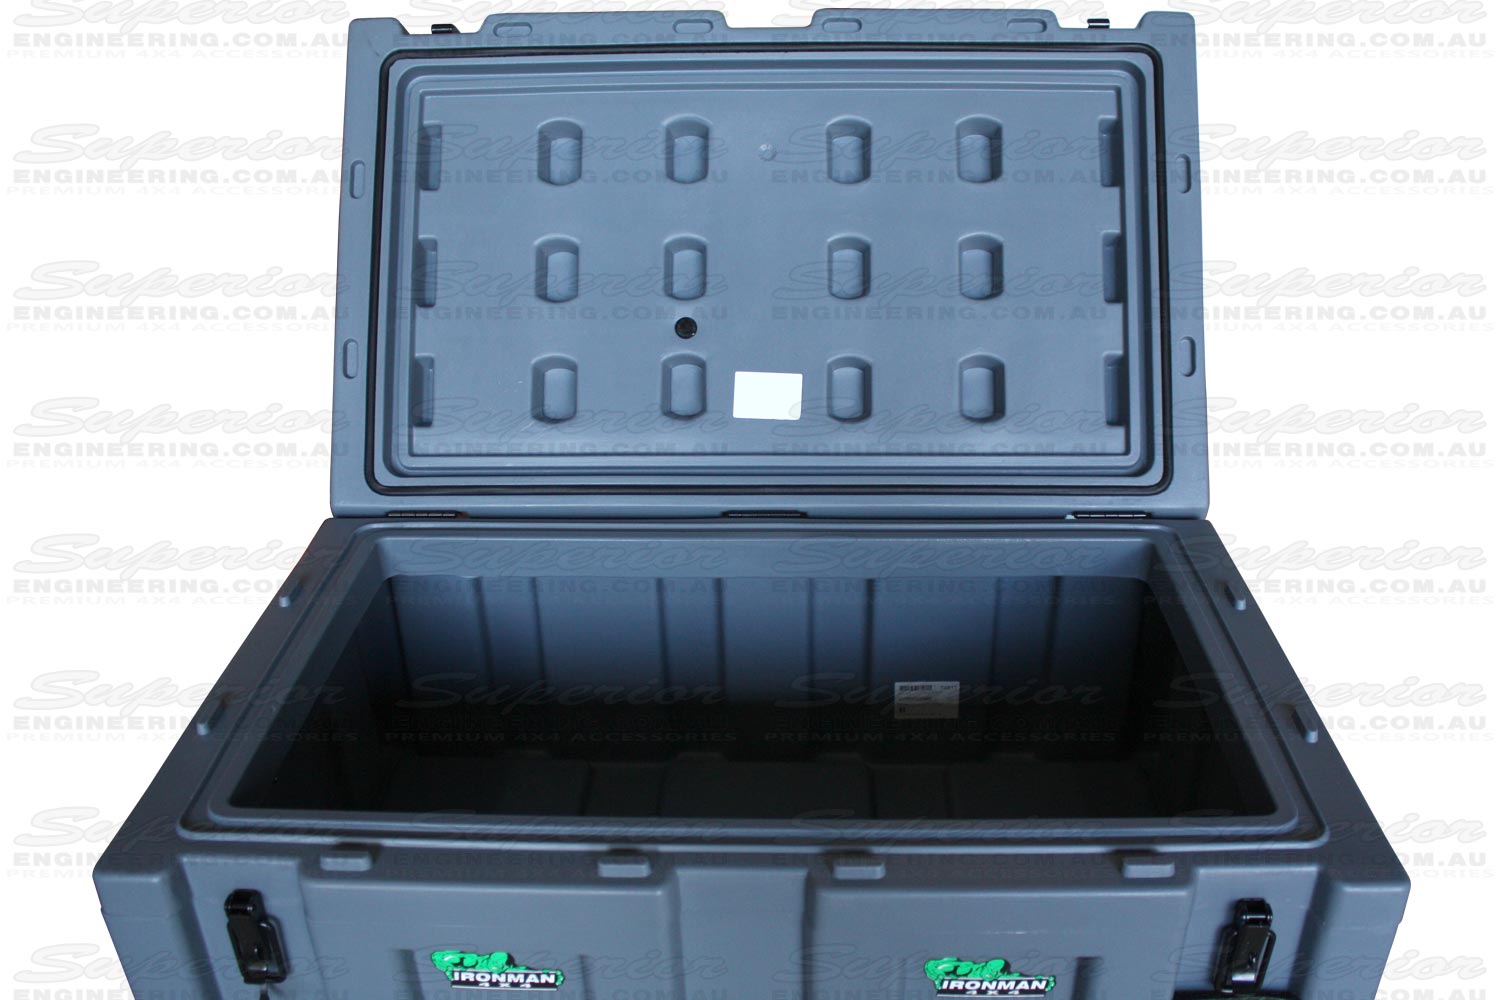 Inside the 135 Litre Ironman 4x4 Space Case